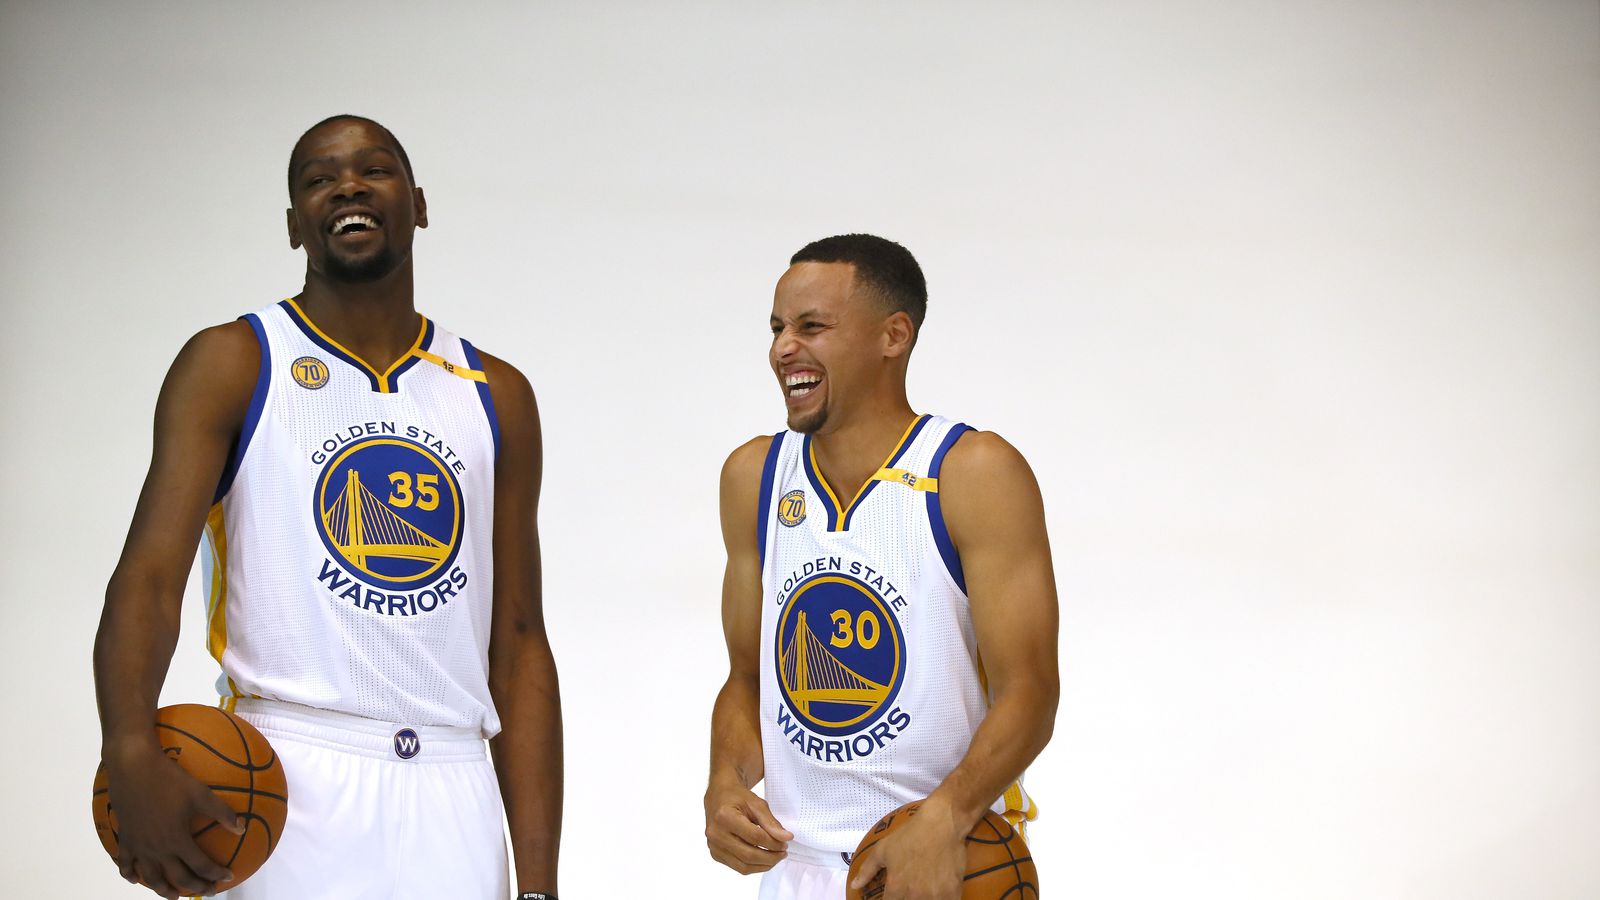 stephen curry and kevin durant wallpaper, basketball player, basketball court, basketball moves, basketball, basketball